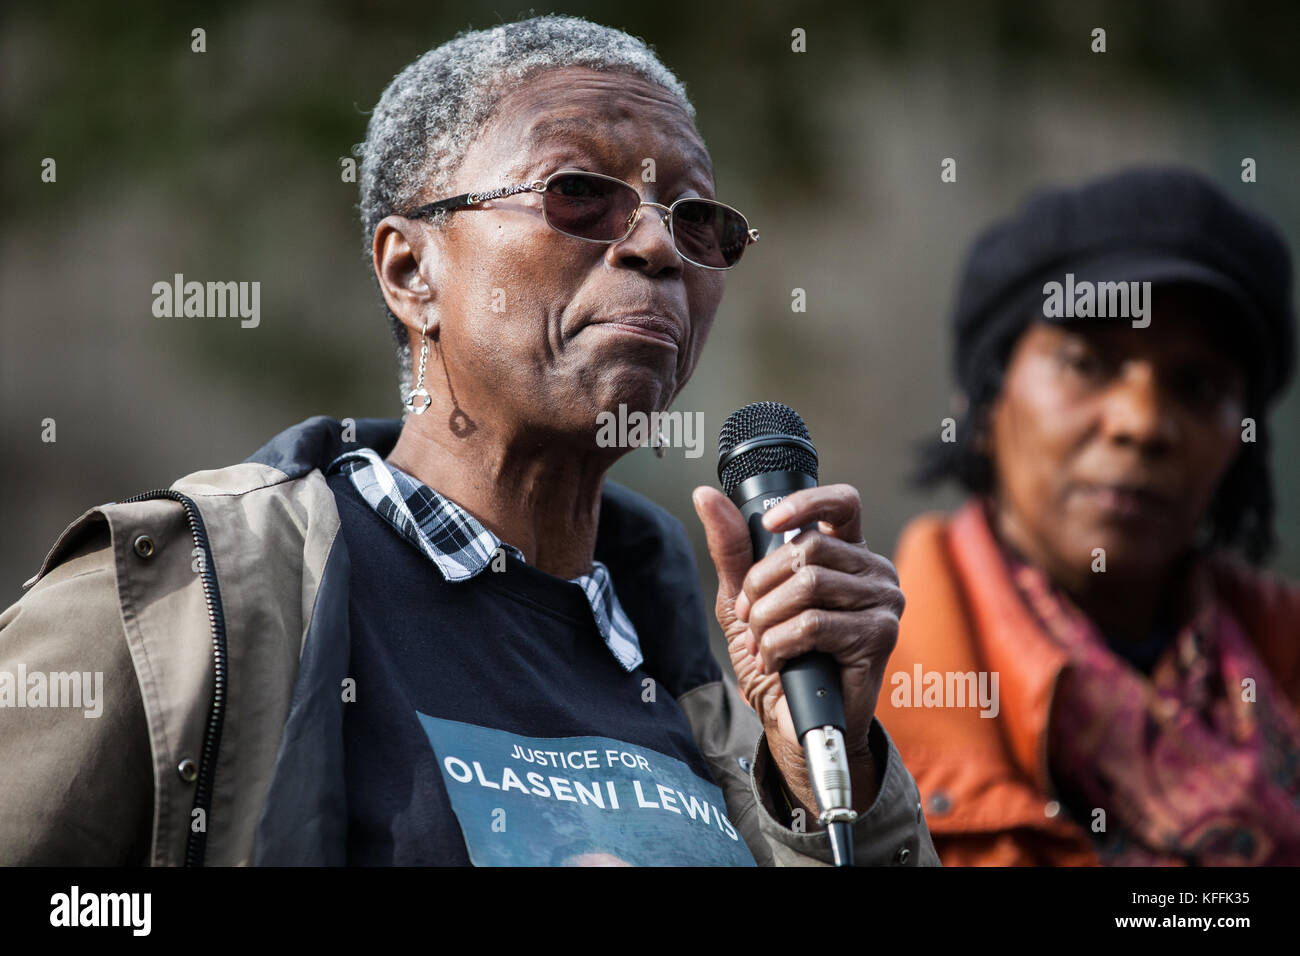 London, UK. 28th October, 2017. Ajibola Lewis, mother of Olaseni Lewis, addresses campaigners from the United Families and Friends Campaign (UFFC) following their annual procession in remembrance of family members and friends who died in police custody, prison, immigration detention or secure psychiatric hospitals. Olaseni Lewis, 23, died following prolonged restraint at the Bethlem Royal Hospital in South London on 31 August 2010. Credit: Mark Kerrison/Alamy Live News Stock Photo